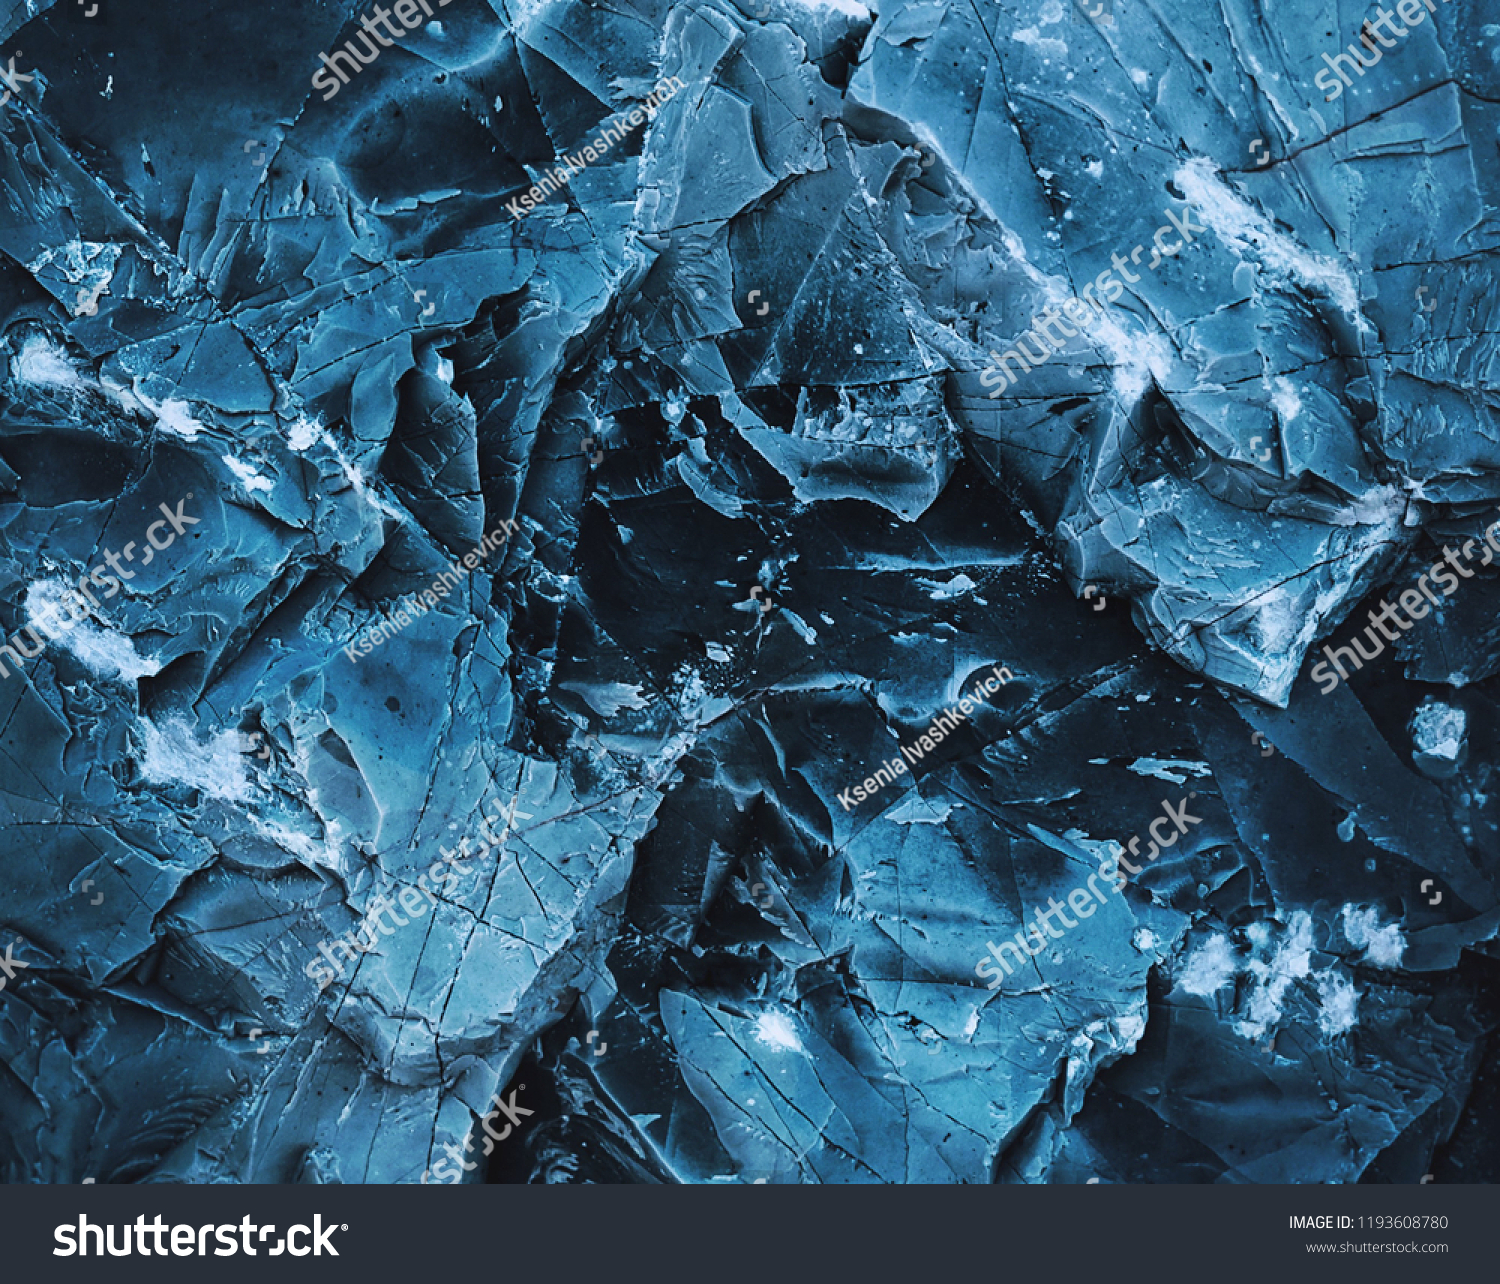 Splits in ice. Сool background. Ice cracks. Rock texture. Ice texture. Rough structure mineral. Stone background. #1193608780